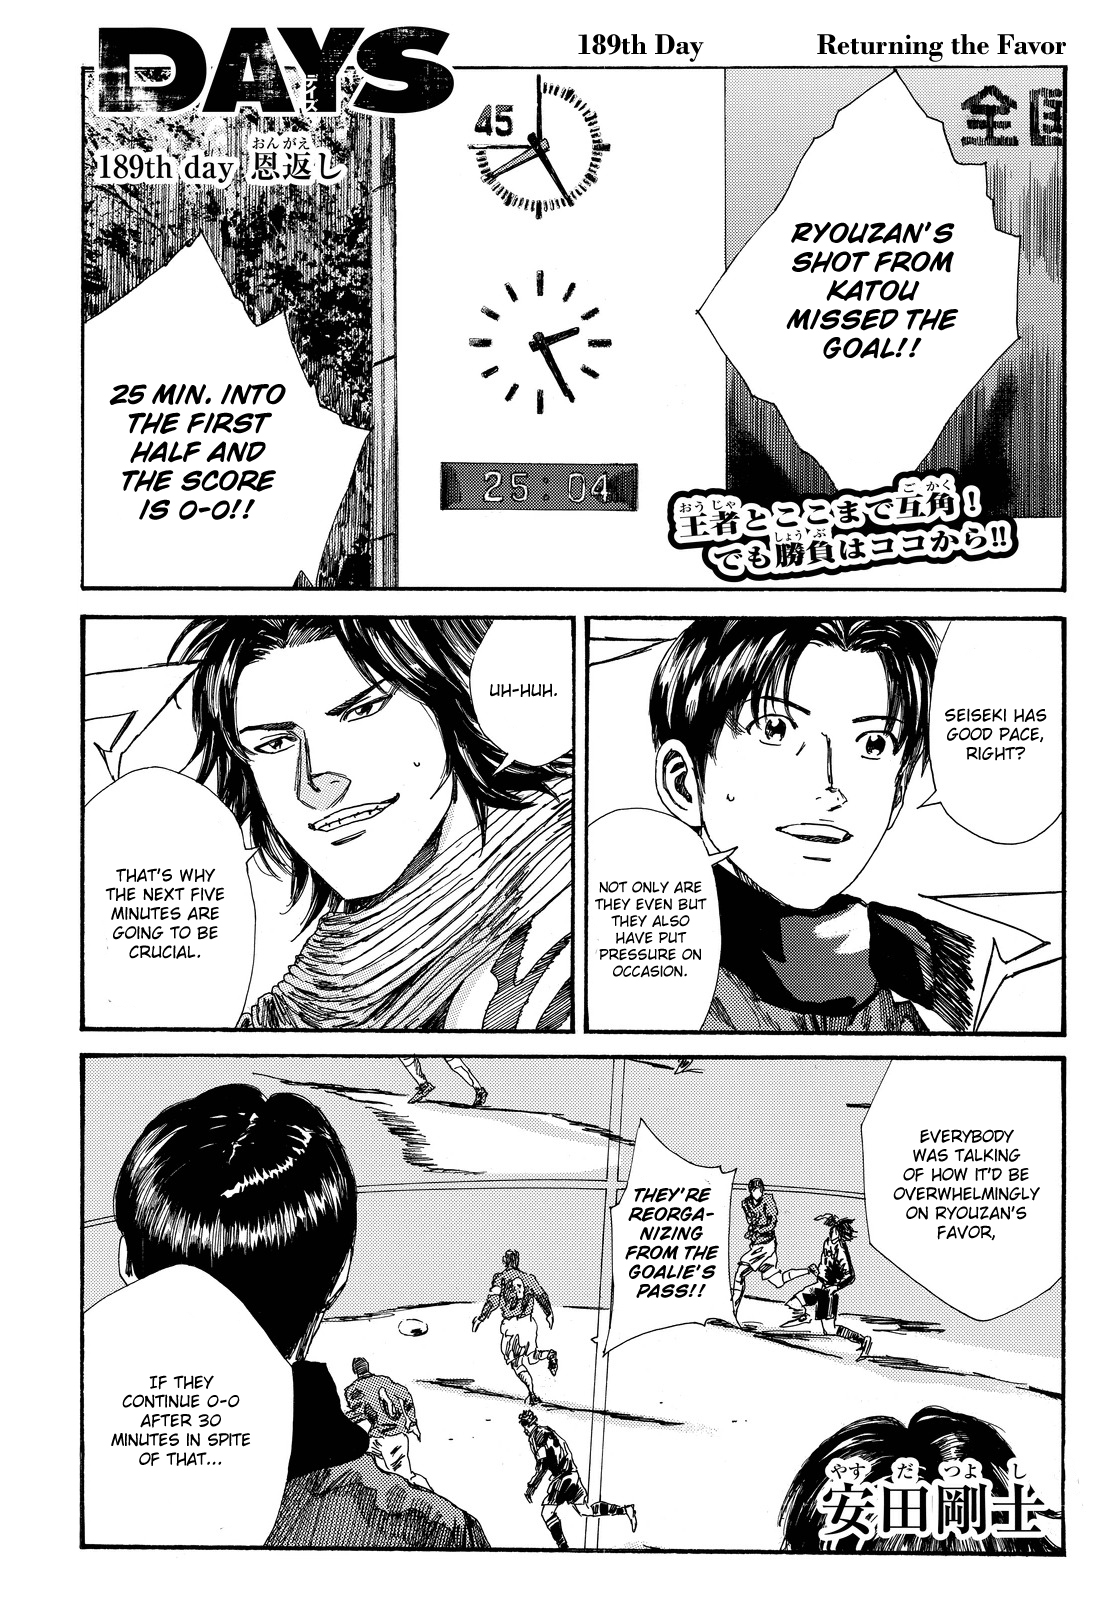 Days Vol. 22 Ch. 189 Returning the Favor